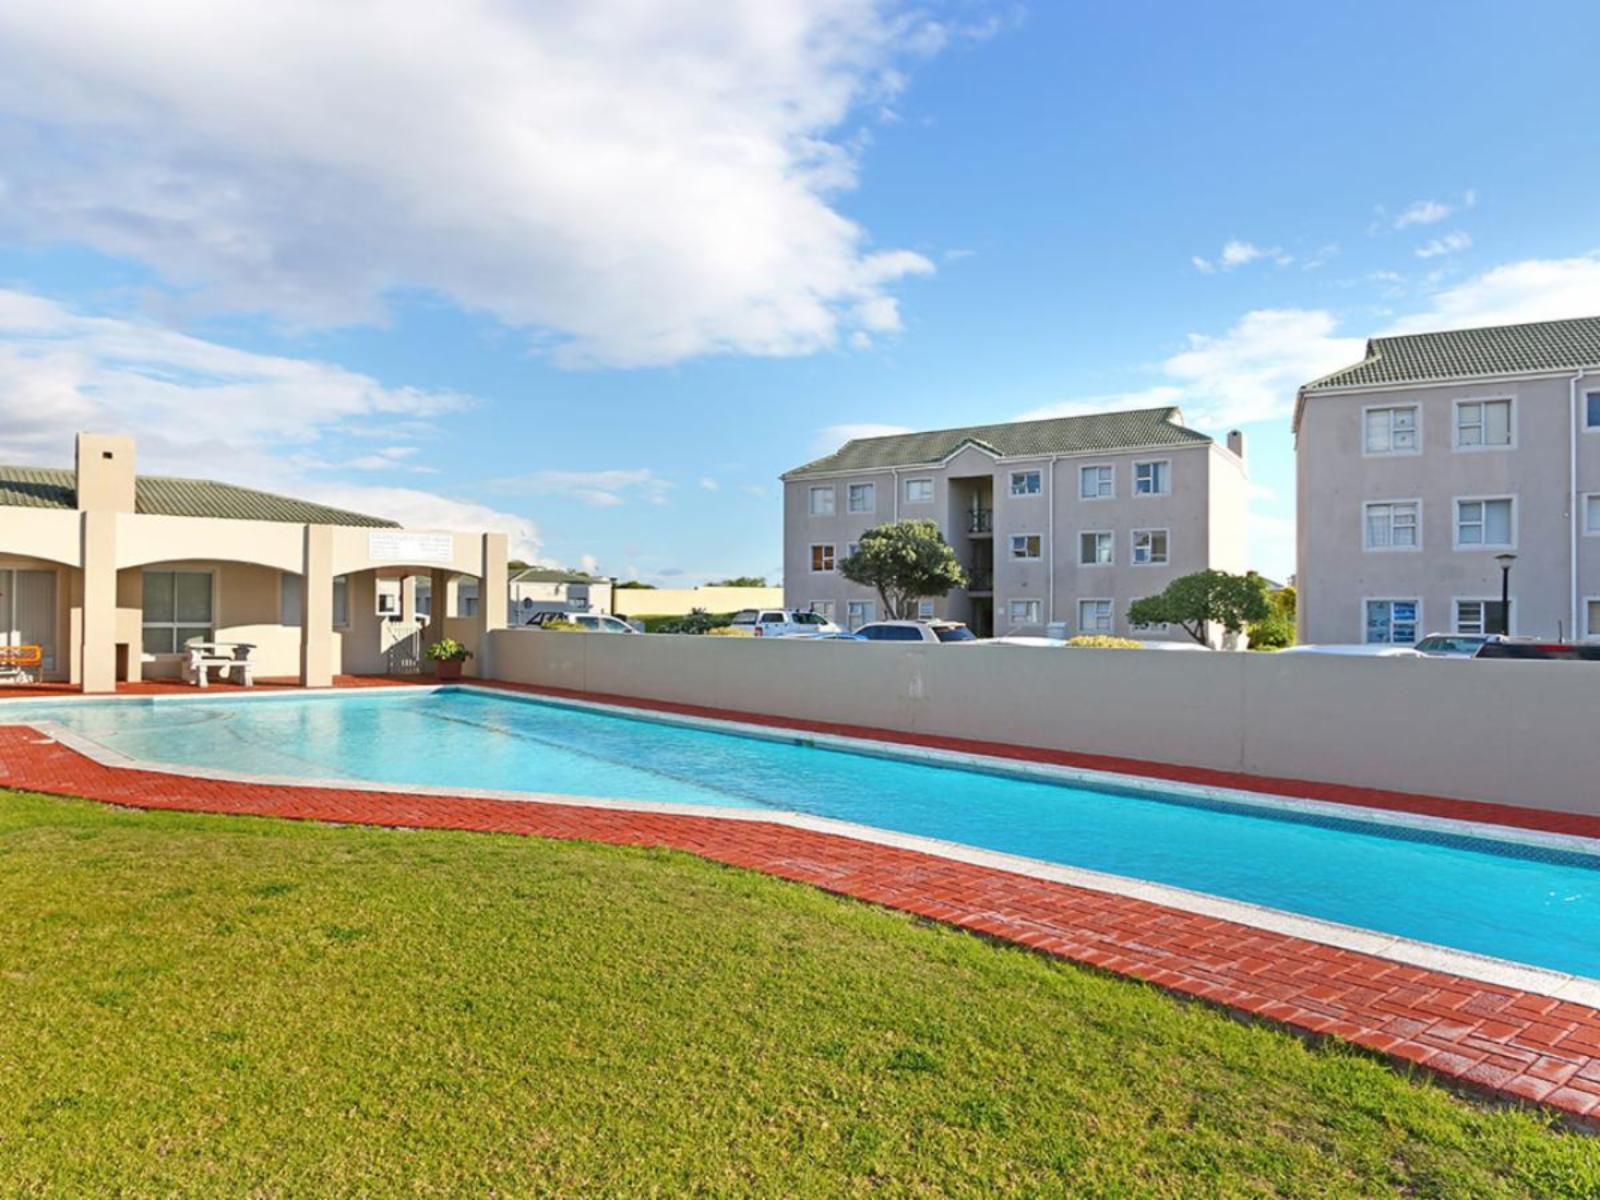 Big Bay Beach Club J32 By Hostagents Big Bay Blouberg Western Cape South Africa Complementary Colors, House, Building, Architecture, Swimming Pool